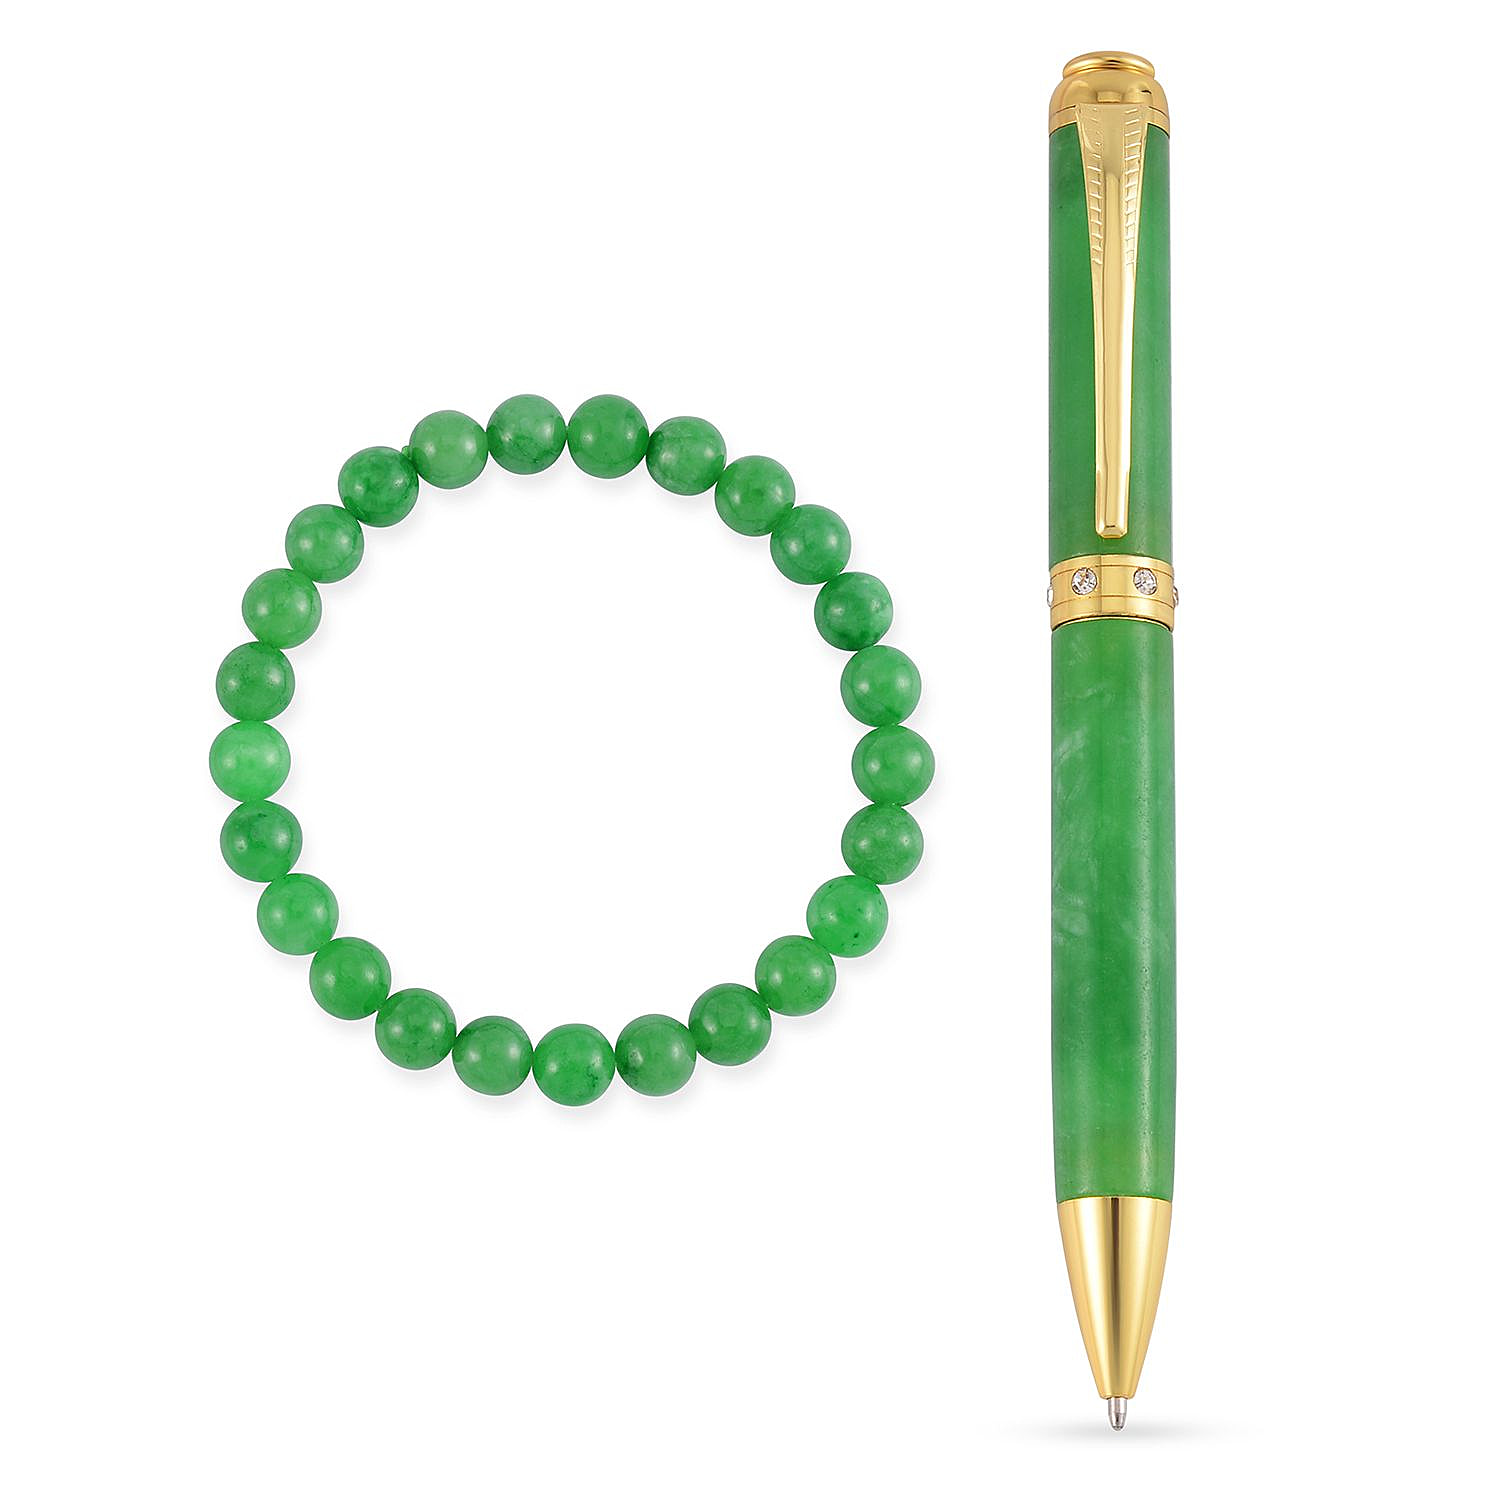 2 Piece Set - Rare Green Jade Ball Point Pen and Stretchable Bracelet (Size 6.5-7)